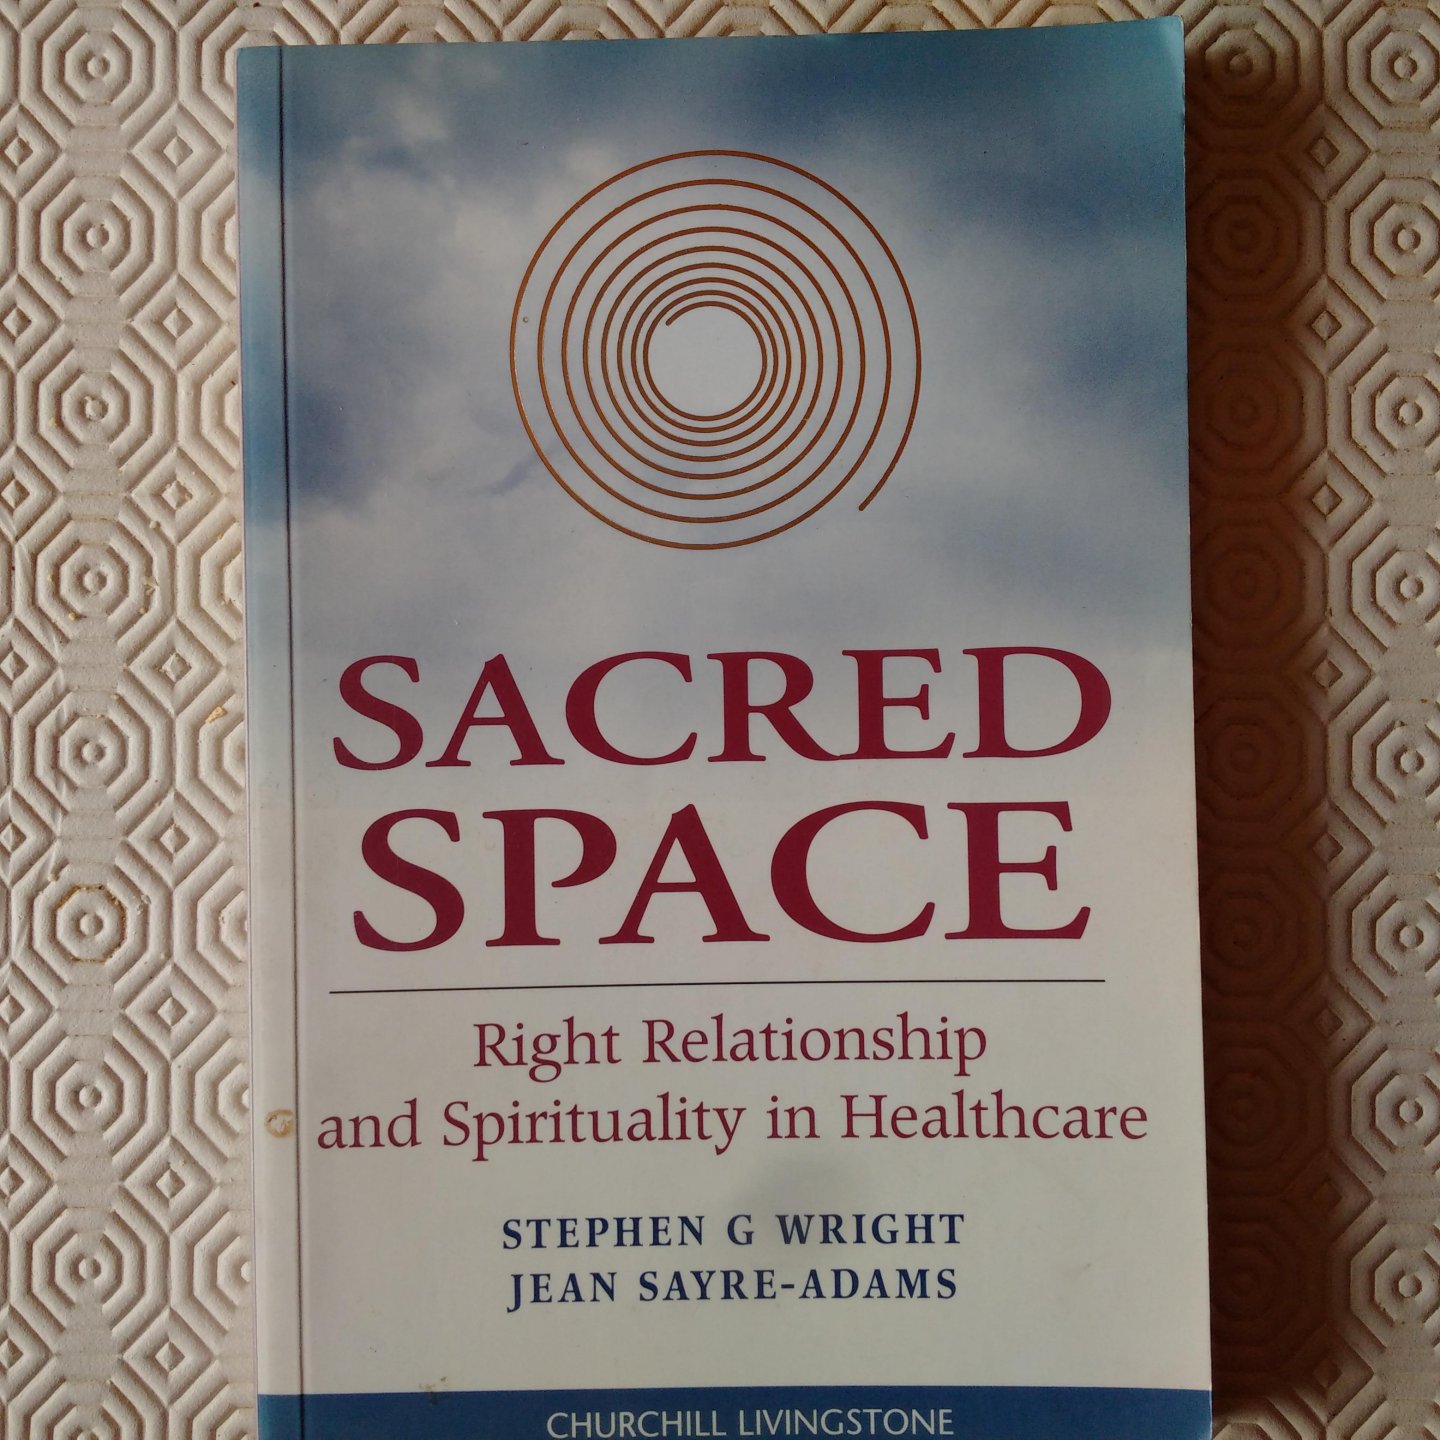 Wright, Stephen G. & Sayre-Adams, Jean - Sacred space. Right relationship and spirituality in healthcare